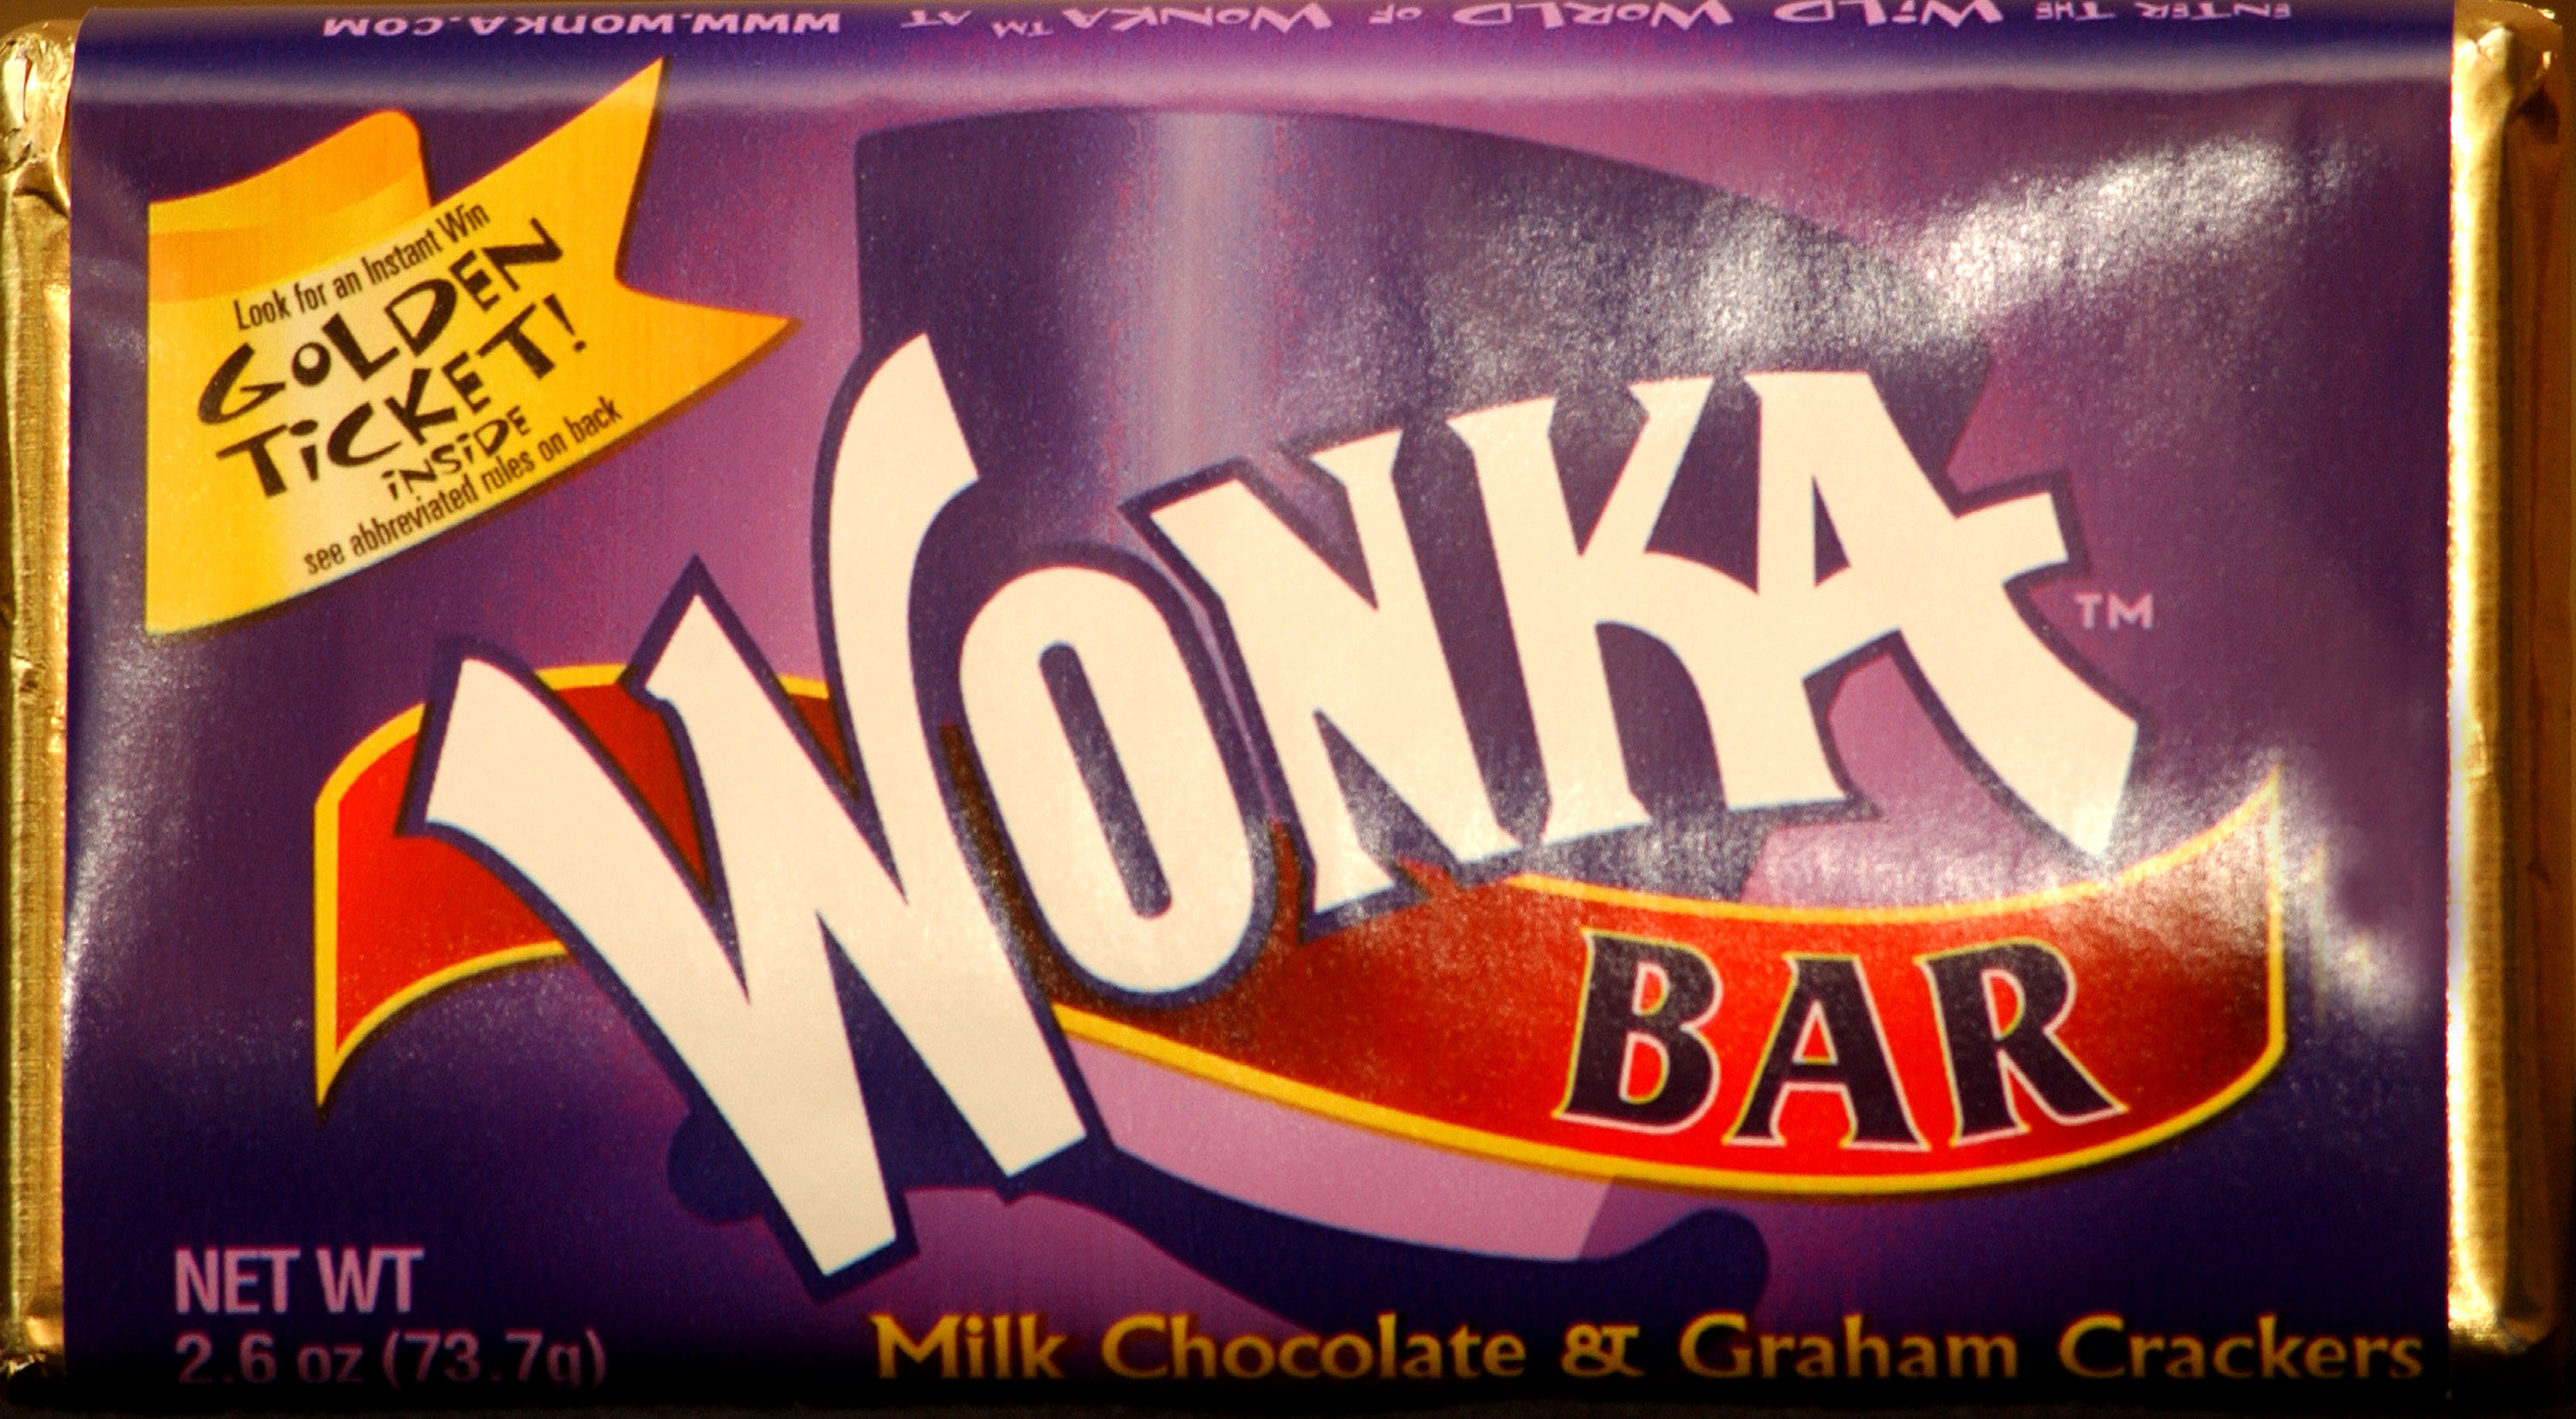 A Wonka bar created for the 30th Anniversary of 'Willy Wonka and the Chocolate Factory'